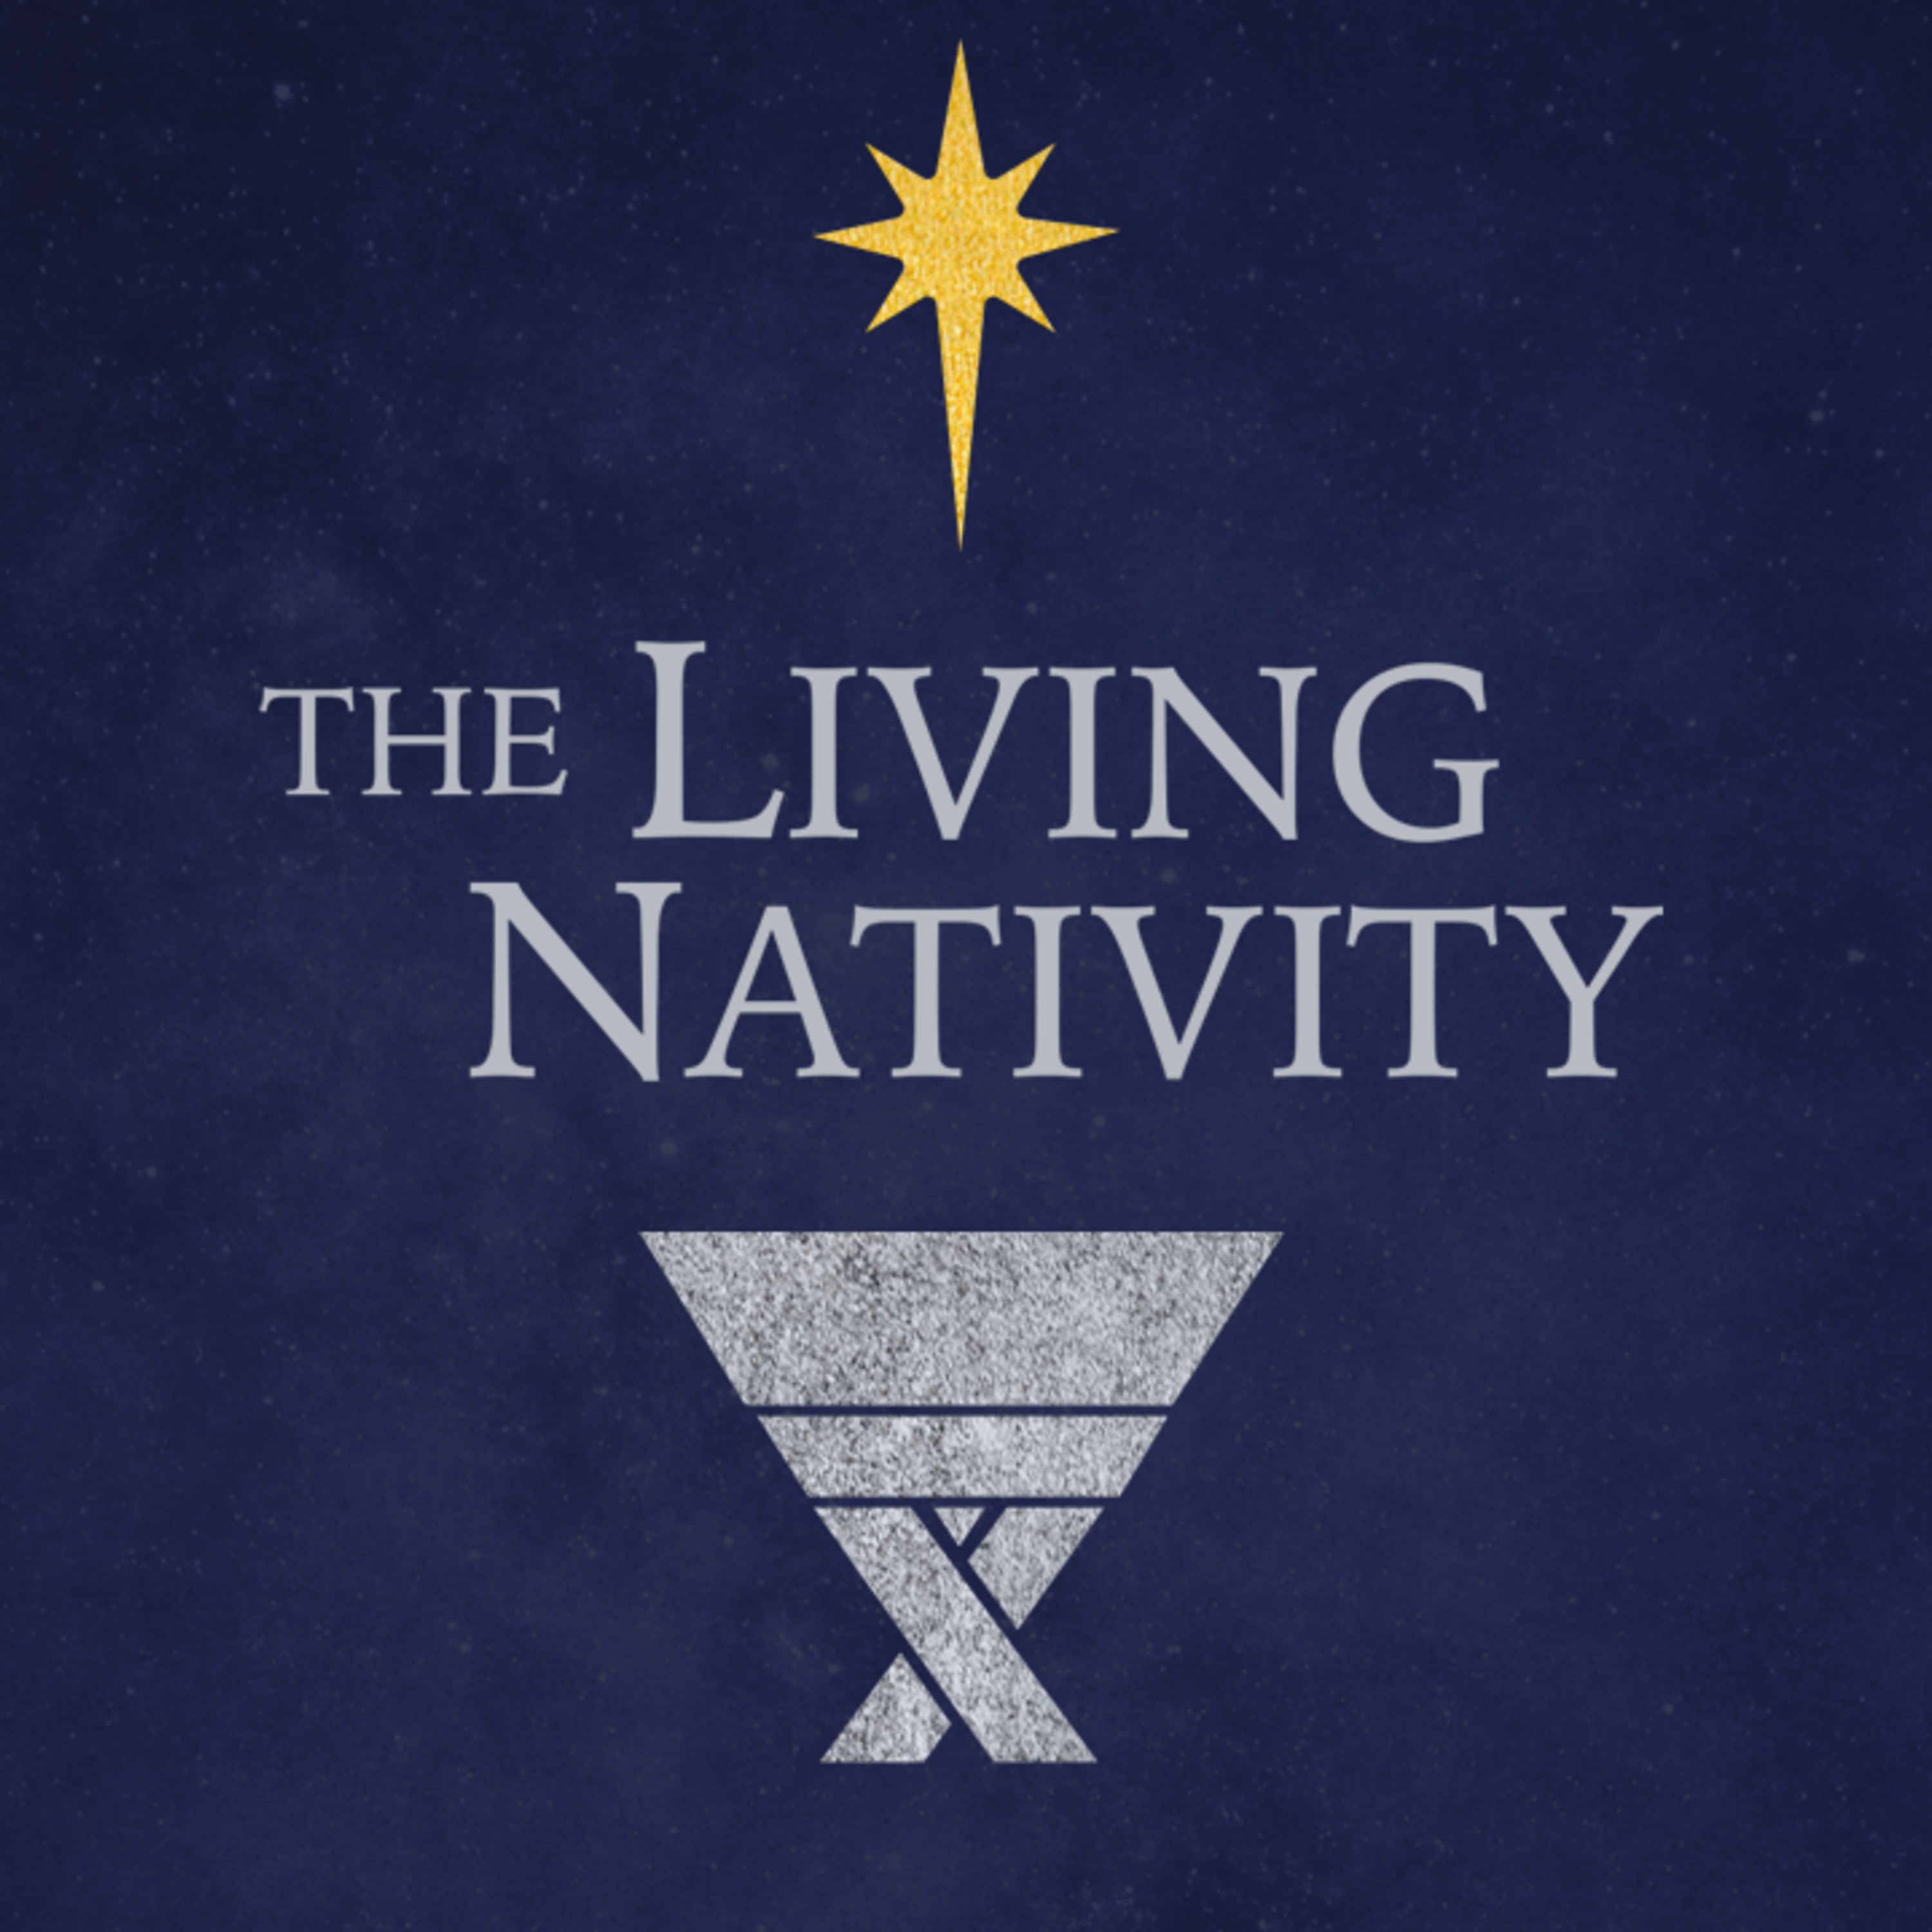 Episode 94: Roswell Presbyterian Church  |  The Living Nativity: When You Need a Friend  |  Sunday, December 13, 2020